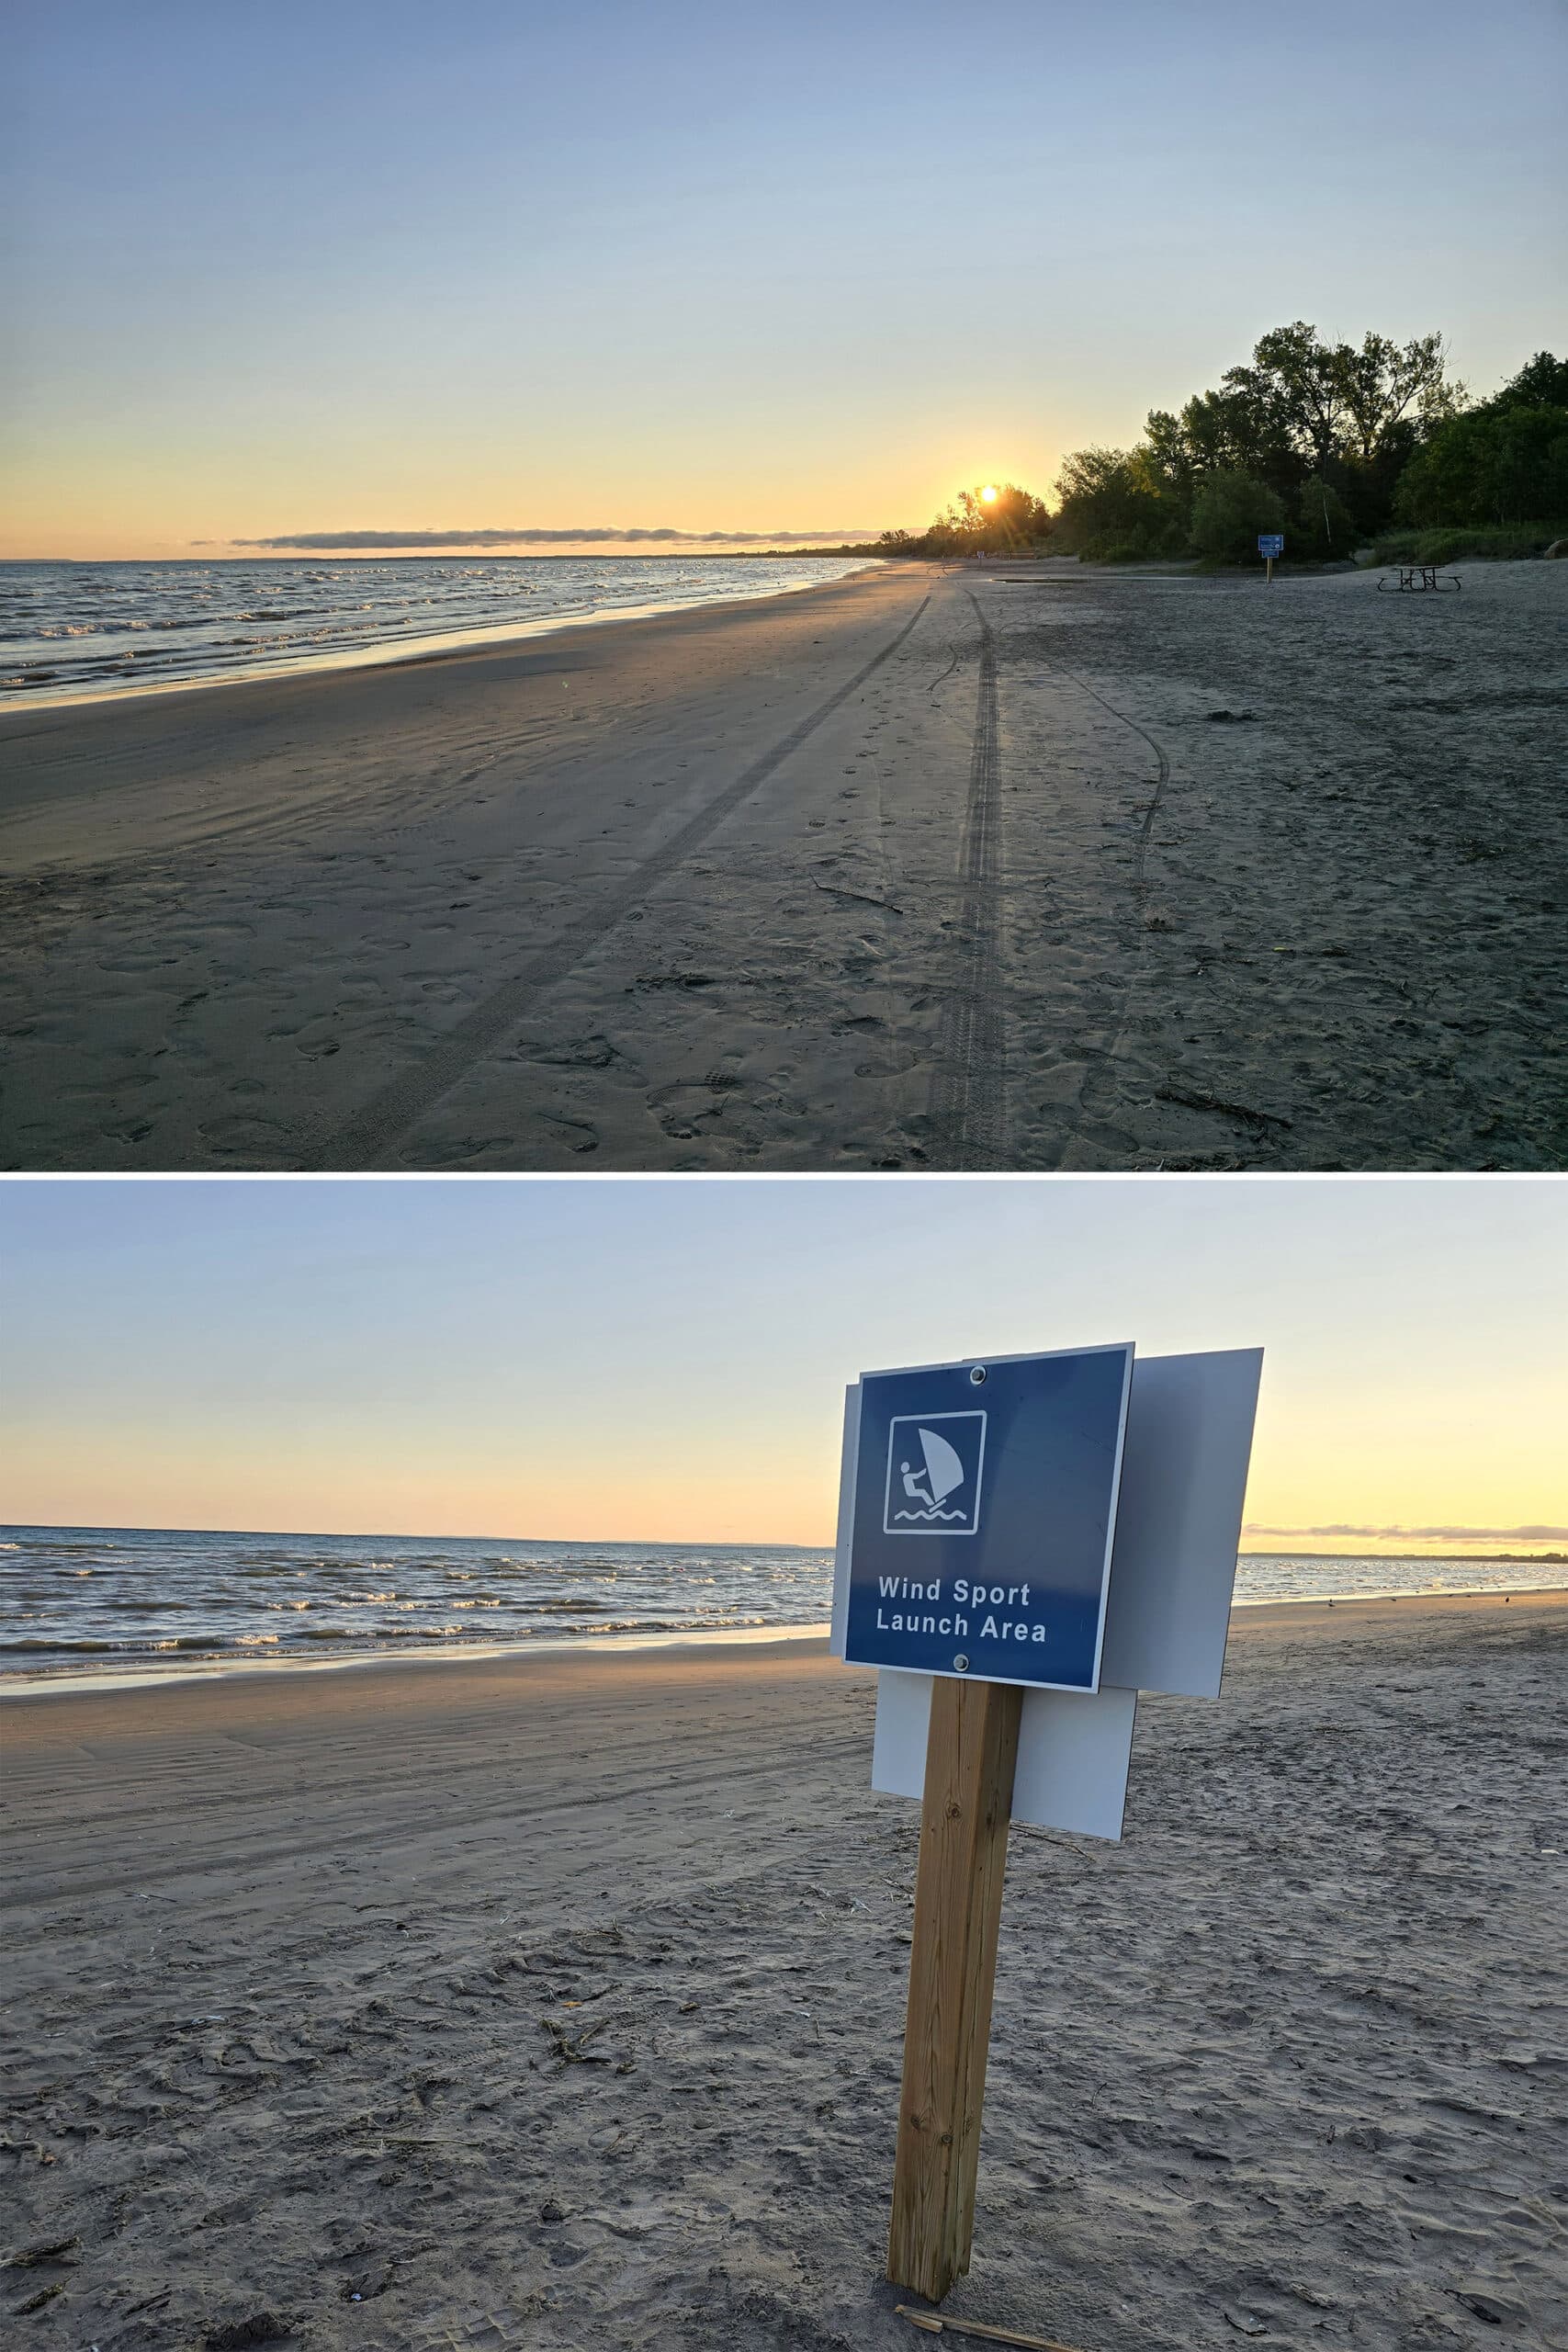 2 part image showing a sandy beach at sunrise, and a sign that indicates a wind sport launching area.